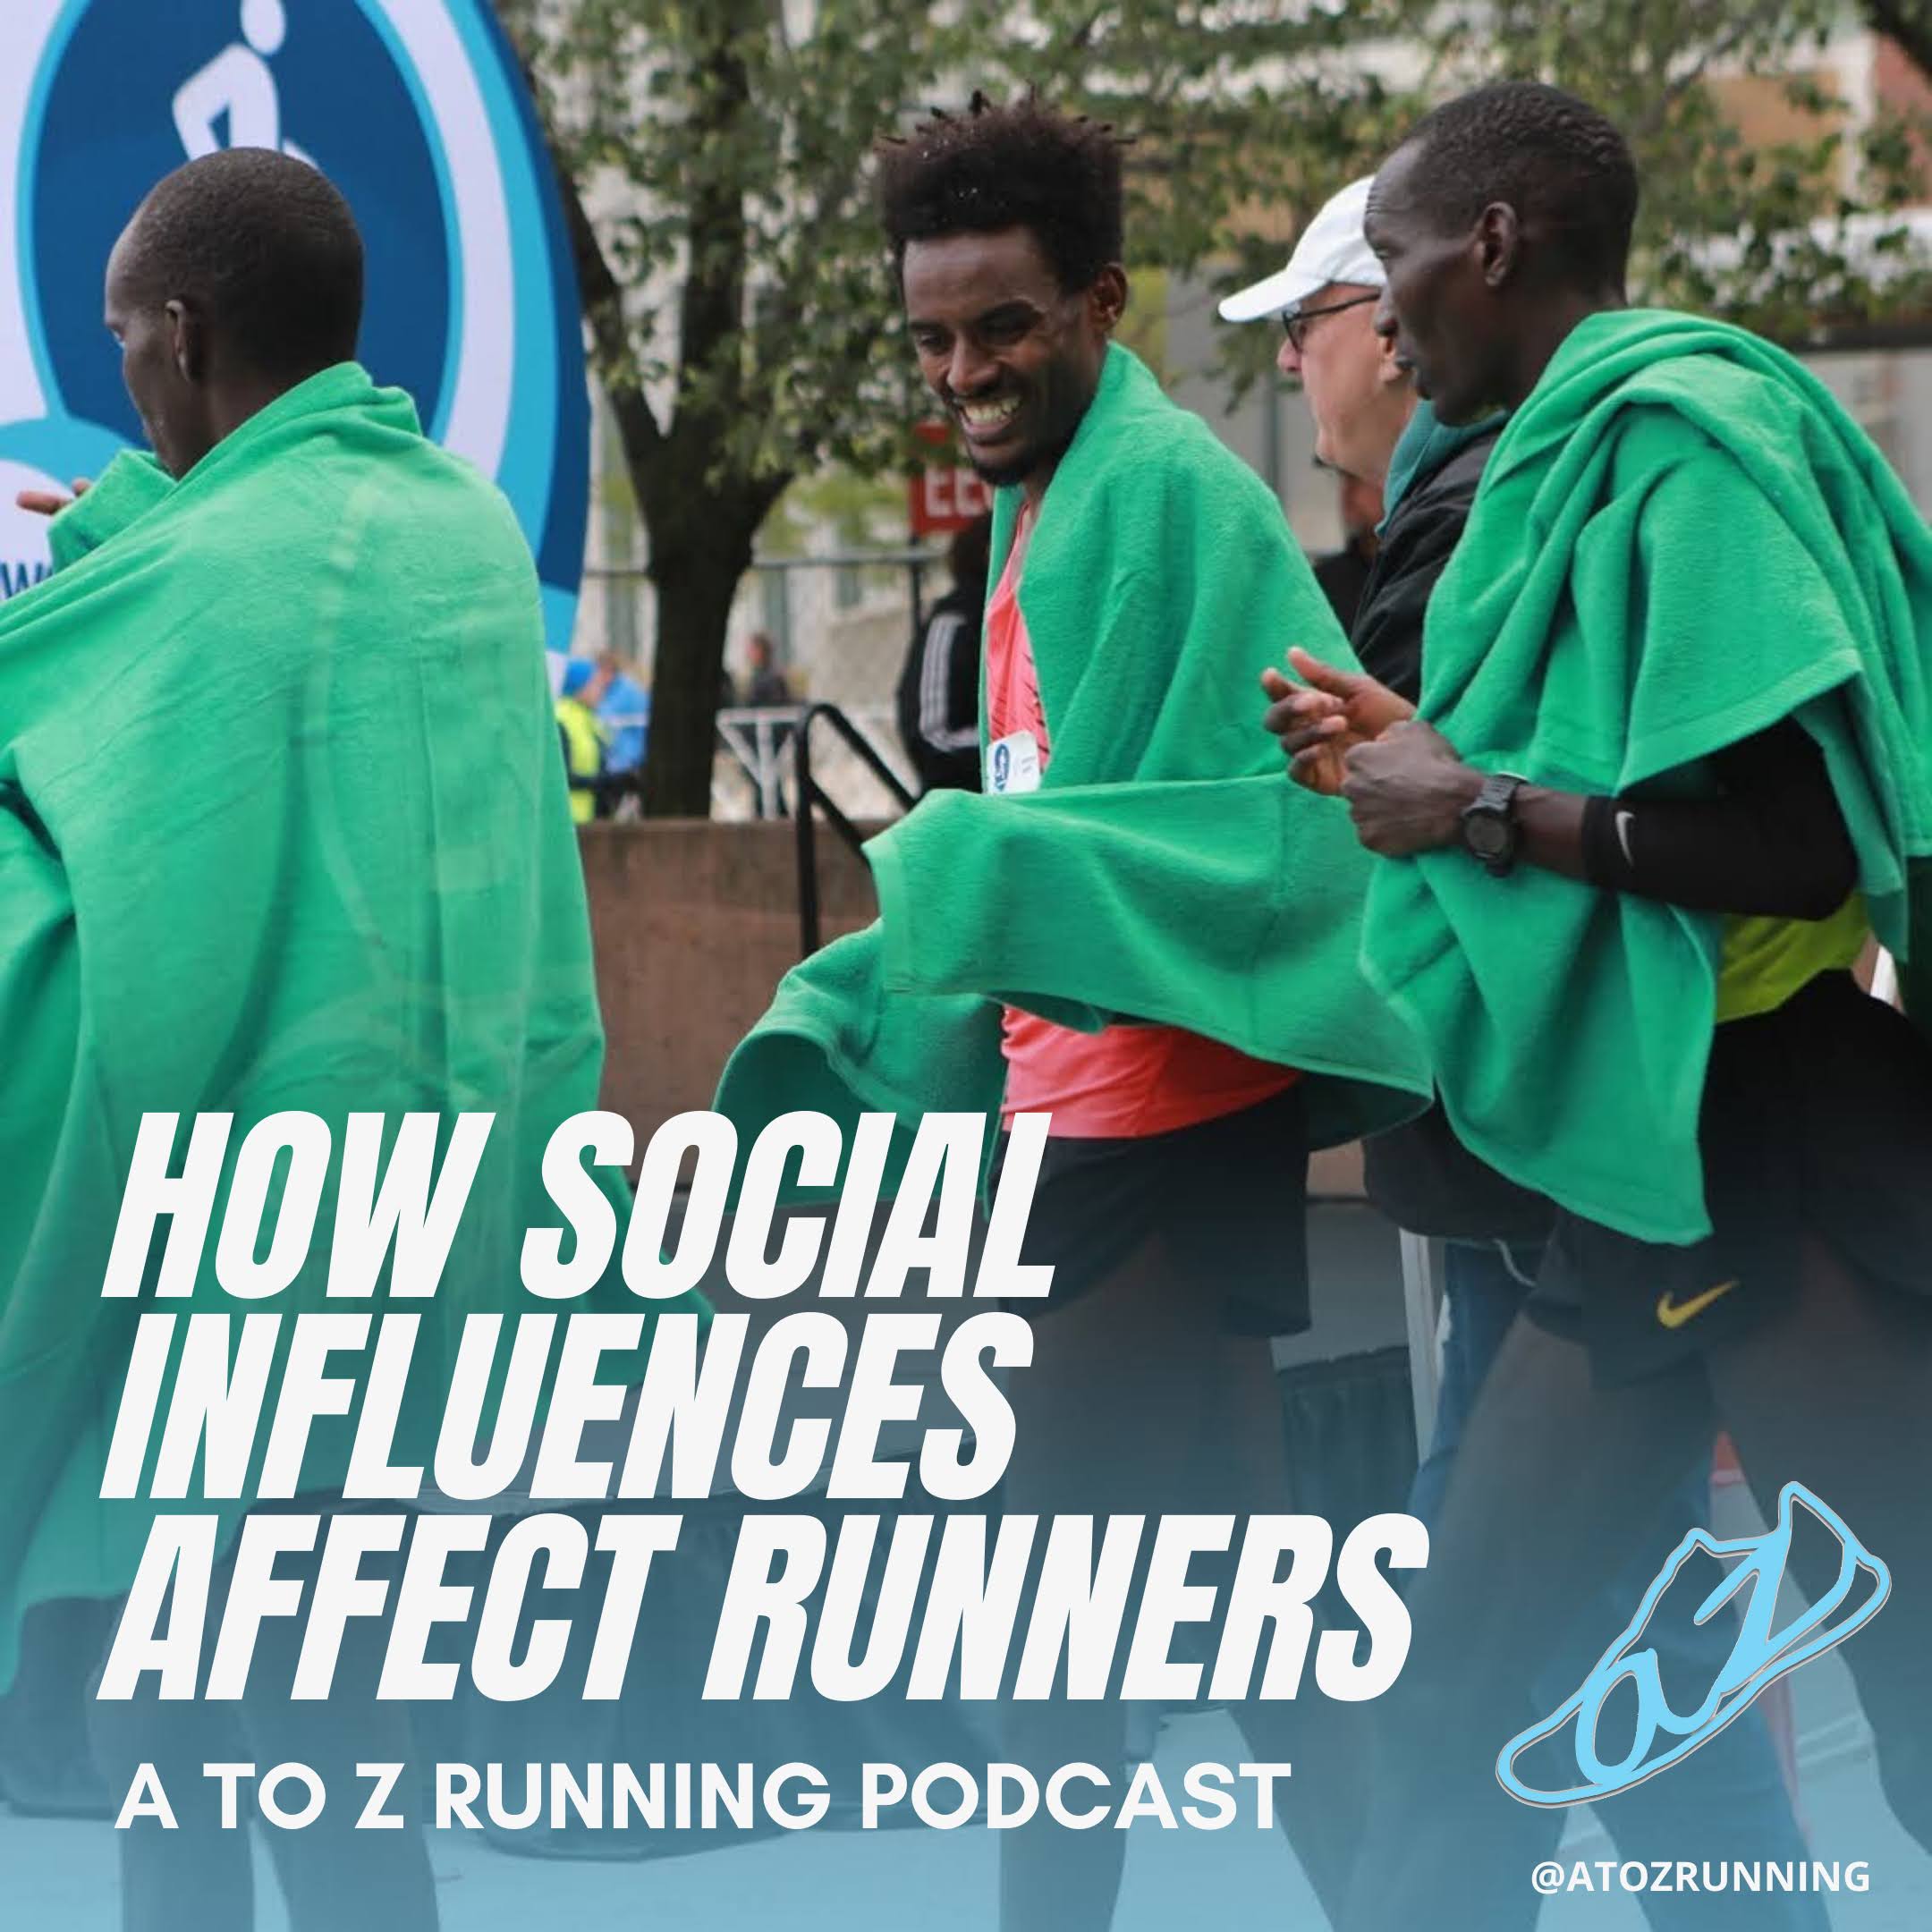 Runners smiling with the text: How Social Influences affect runners